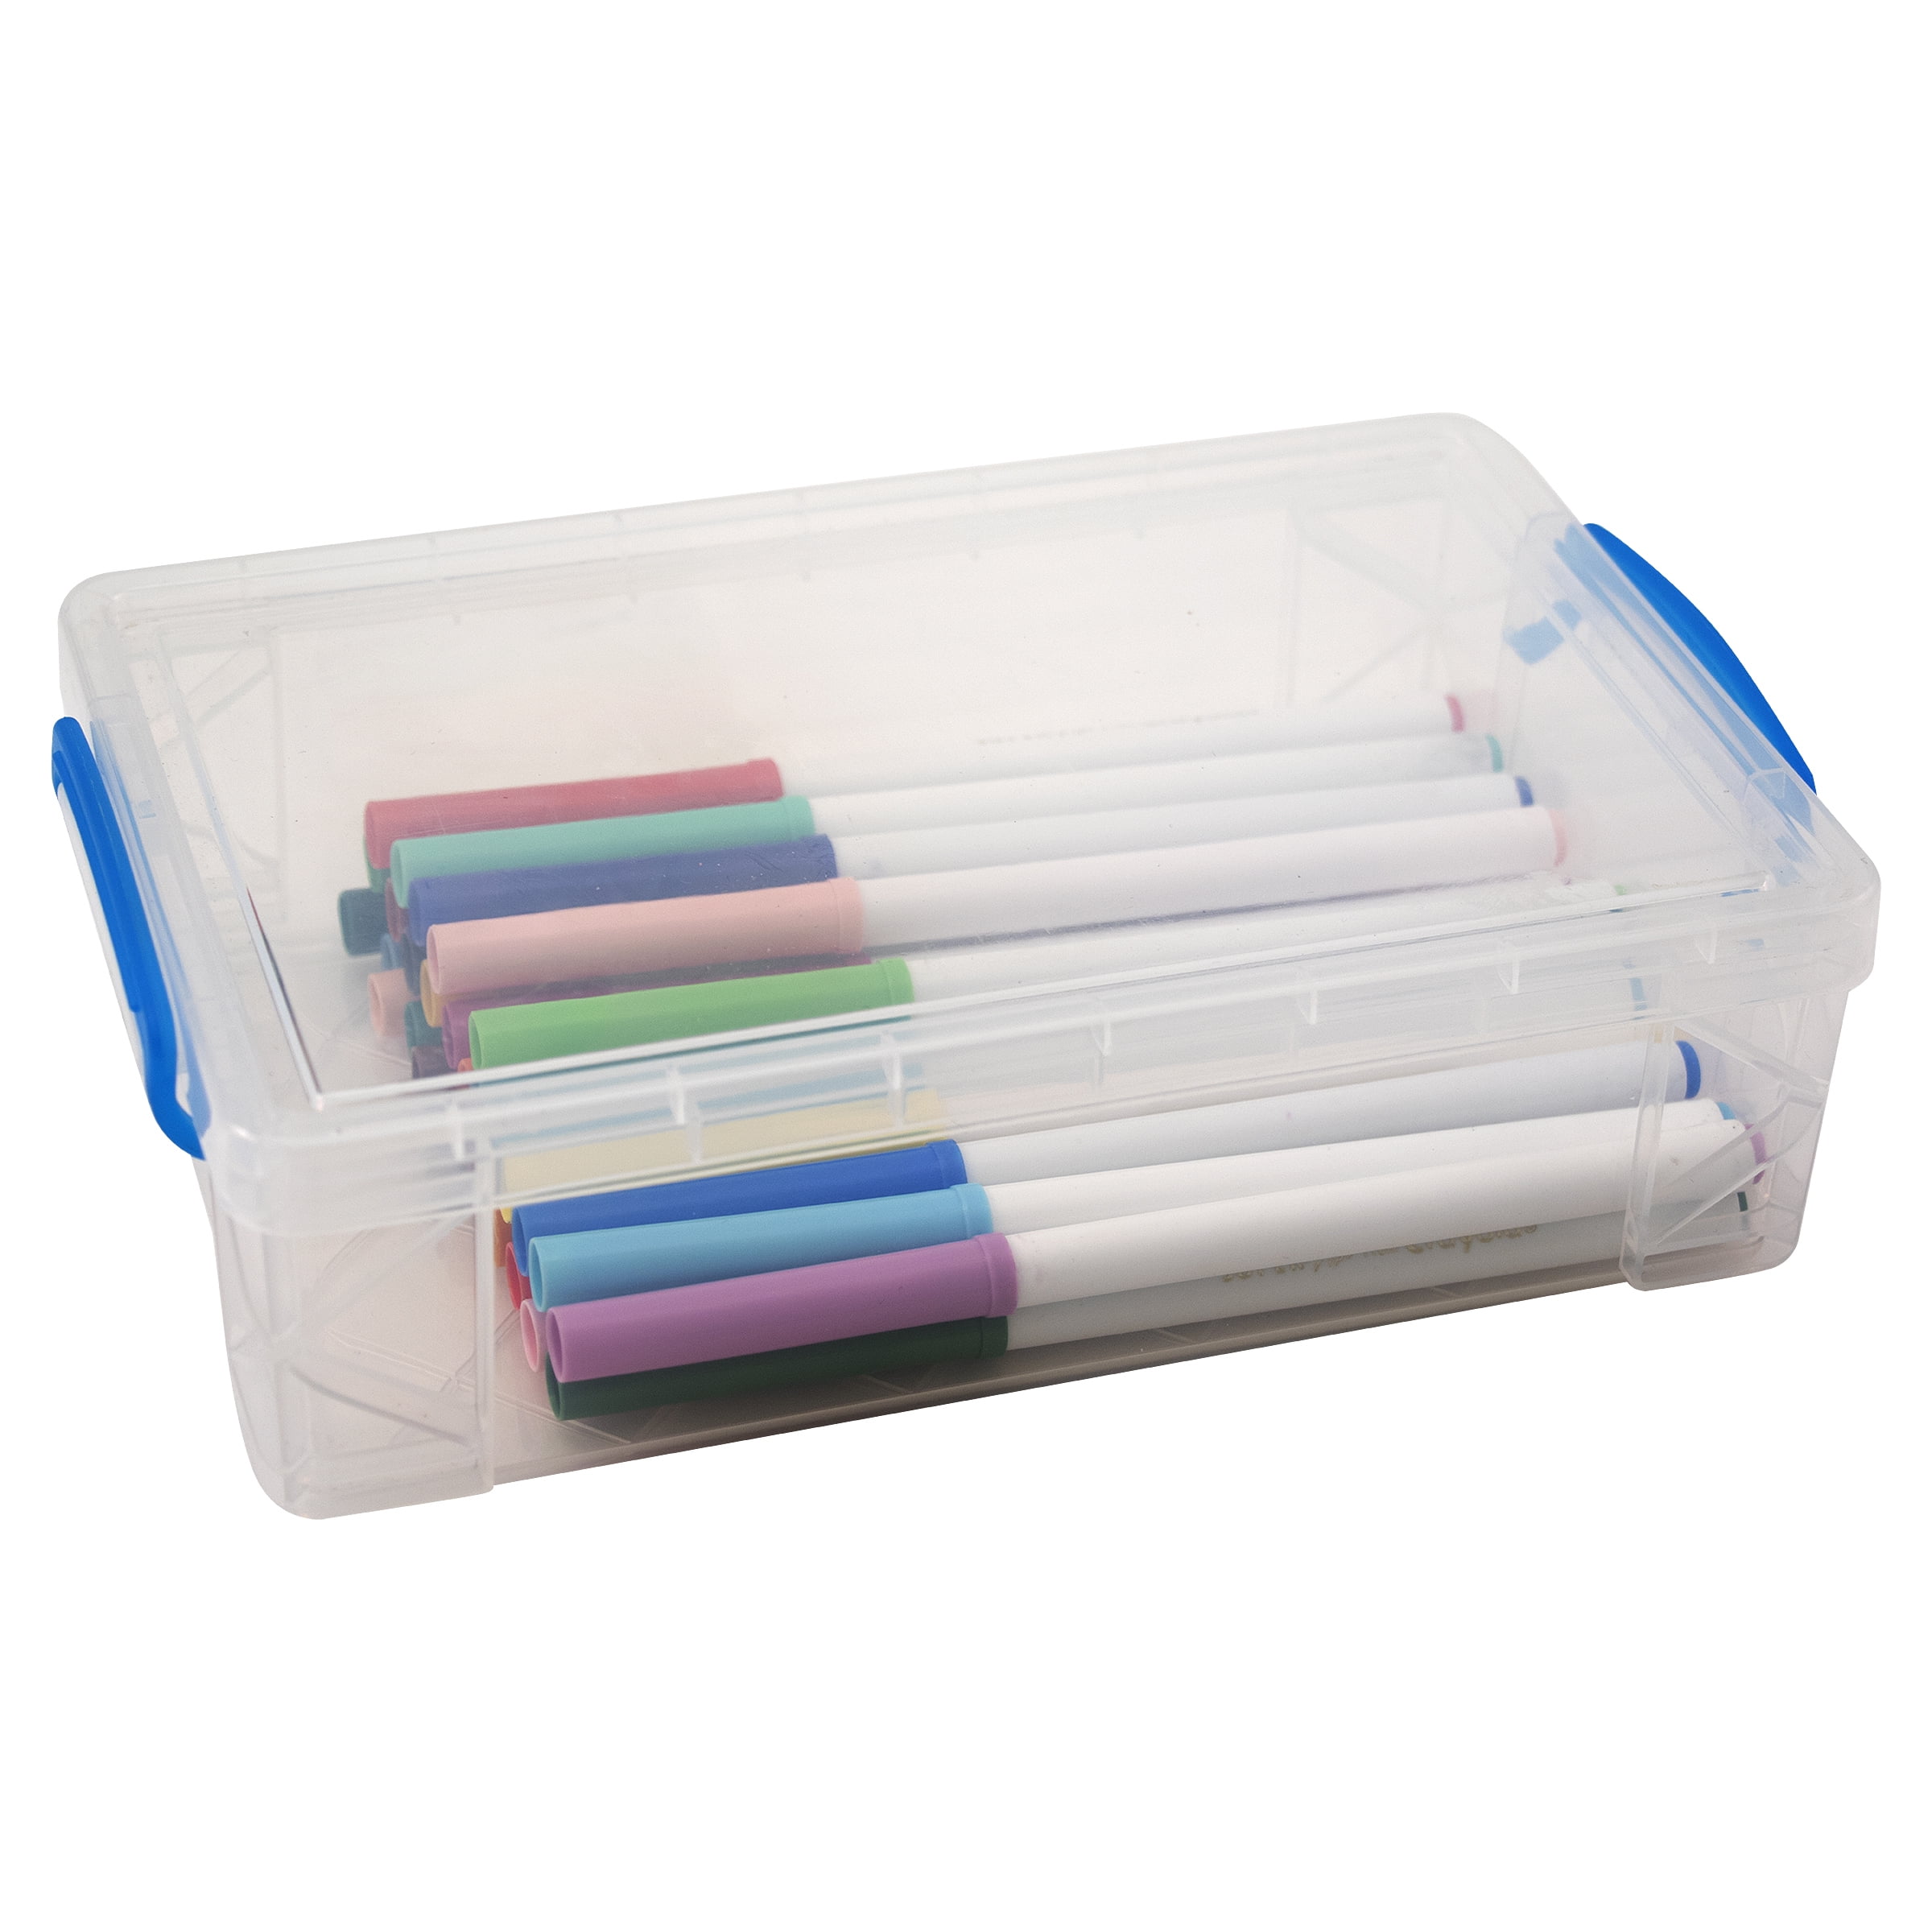 Super Stacker® Large Pencil Box, Clear with Blue Handles